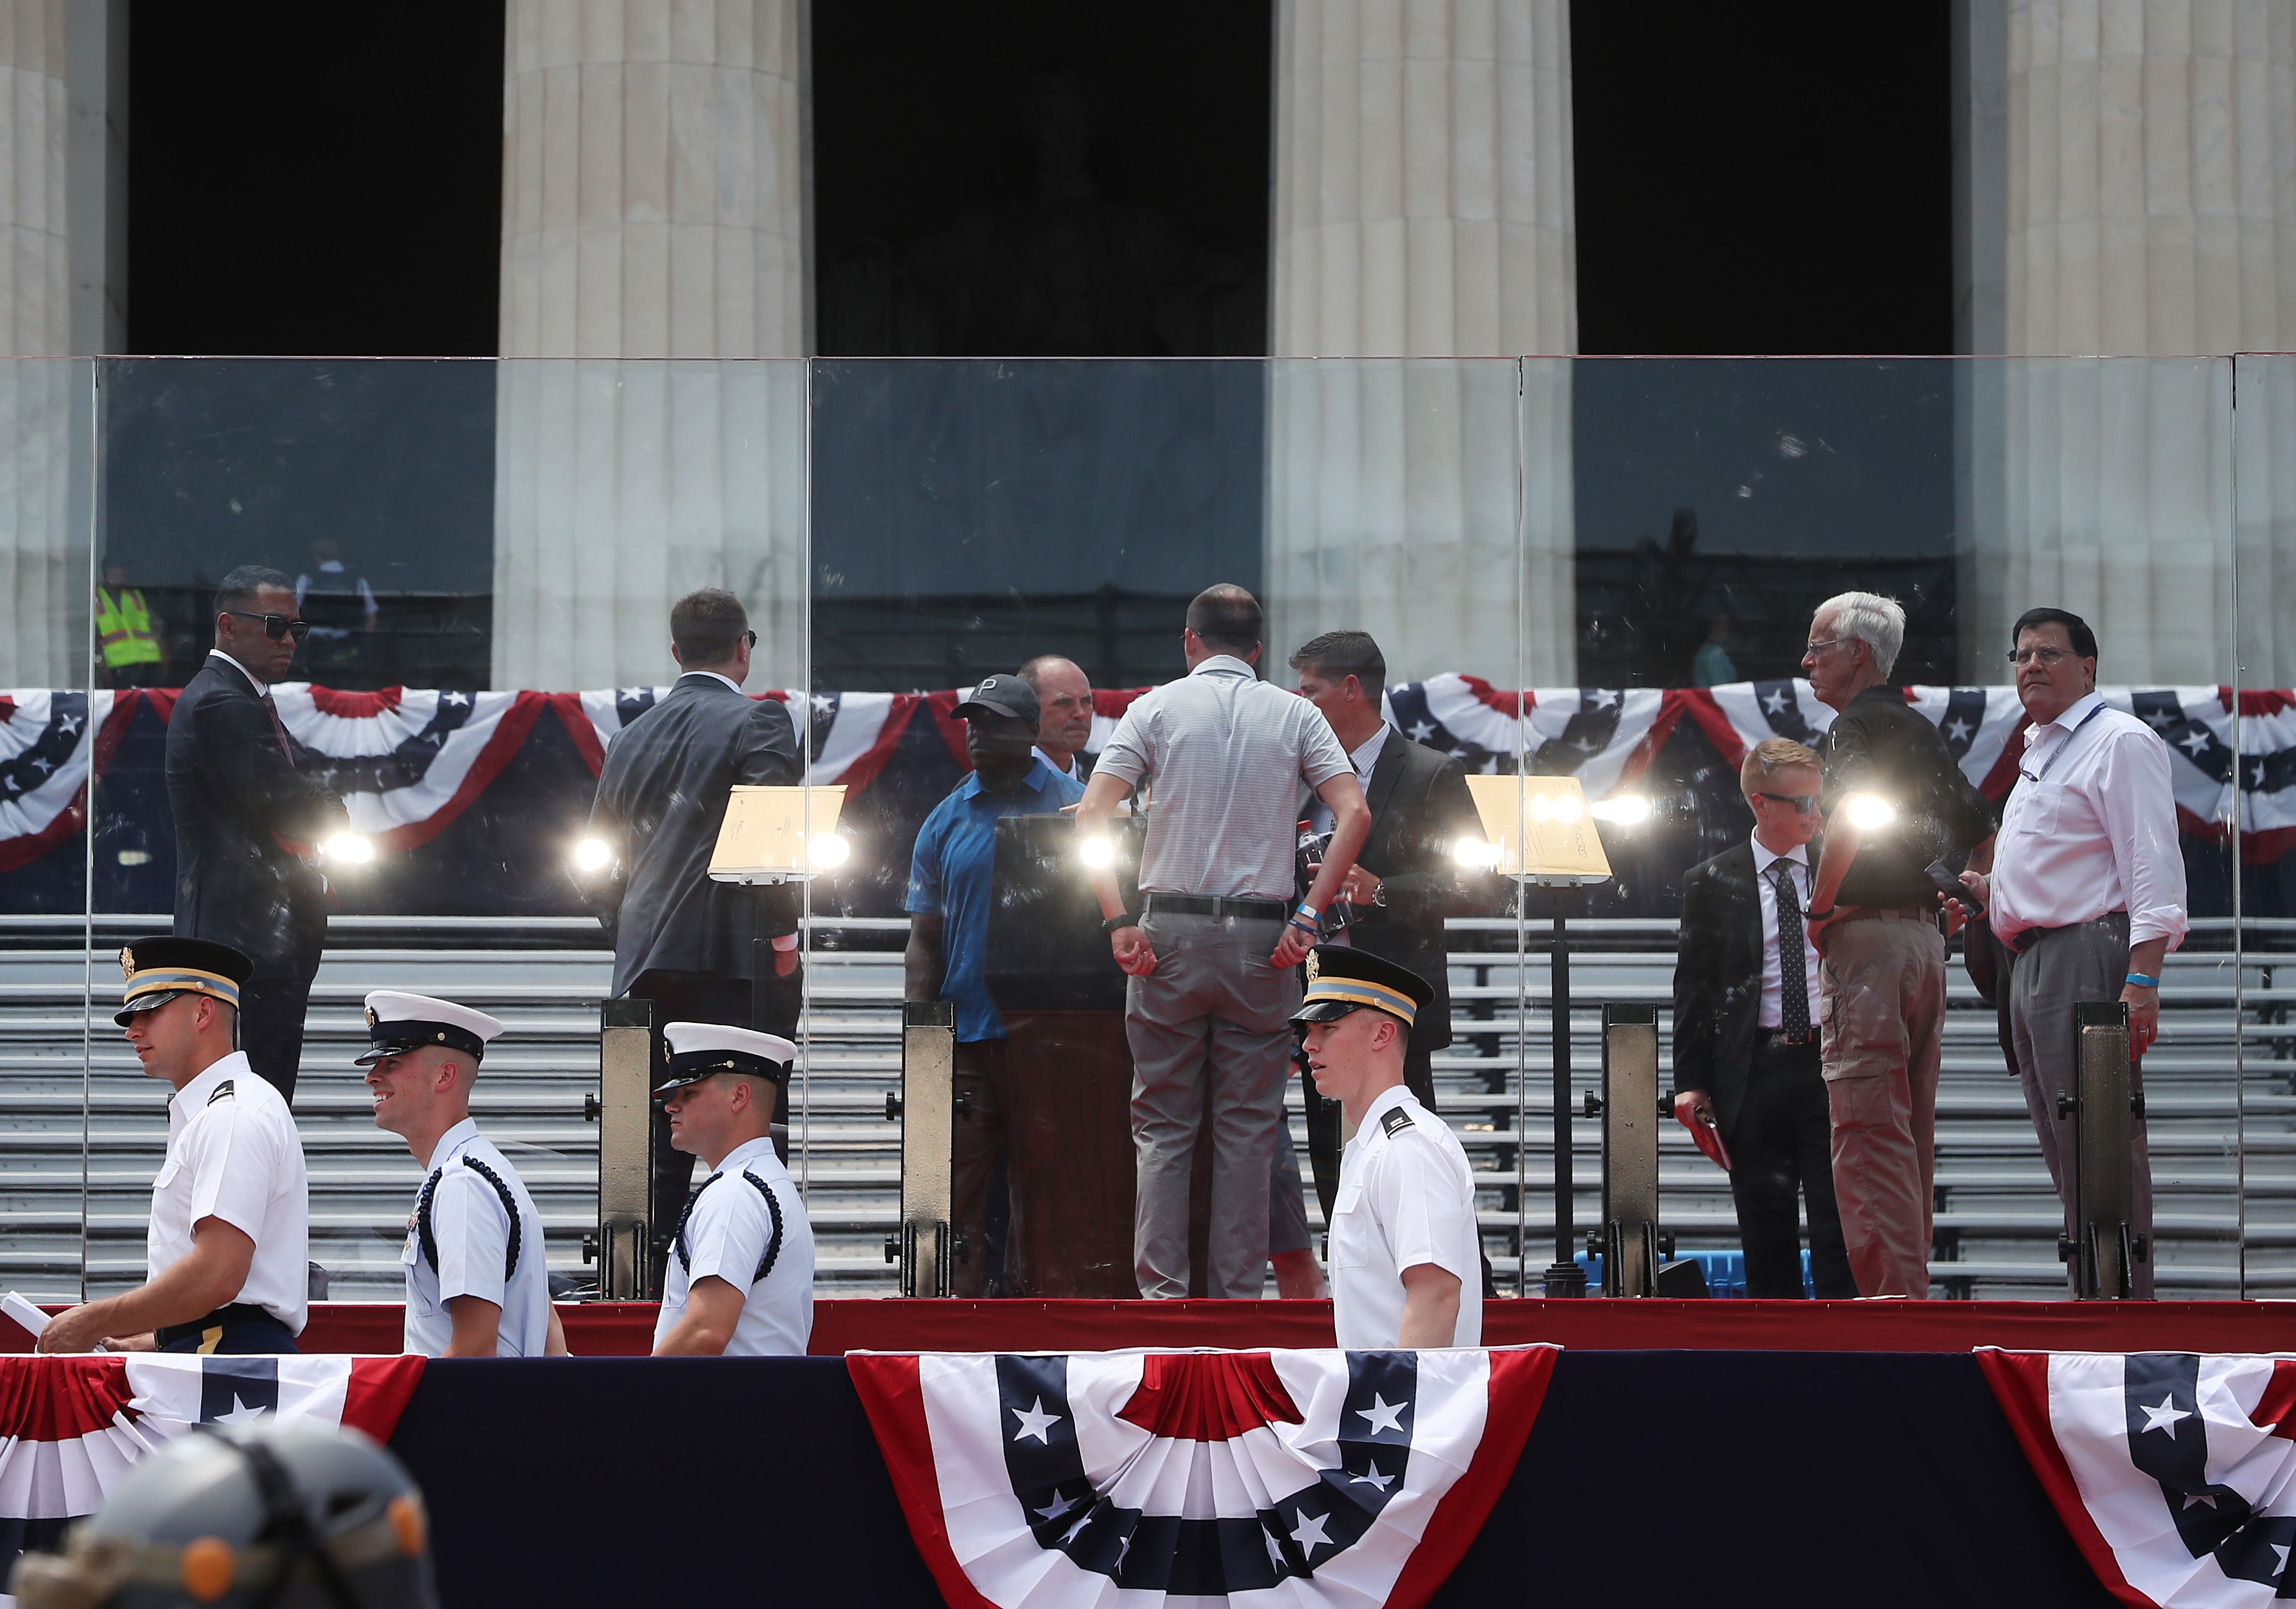  Workers prepare the stage where President Trump will speak at the Lincoln Memorial on the Fourth of July "Salute to America" celebration, on July 3, 2019 in Washington, DC. 